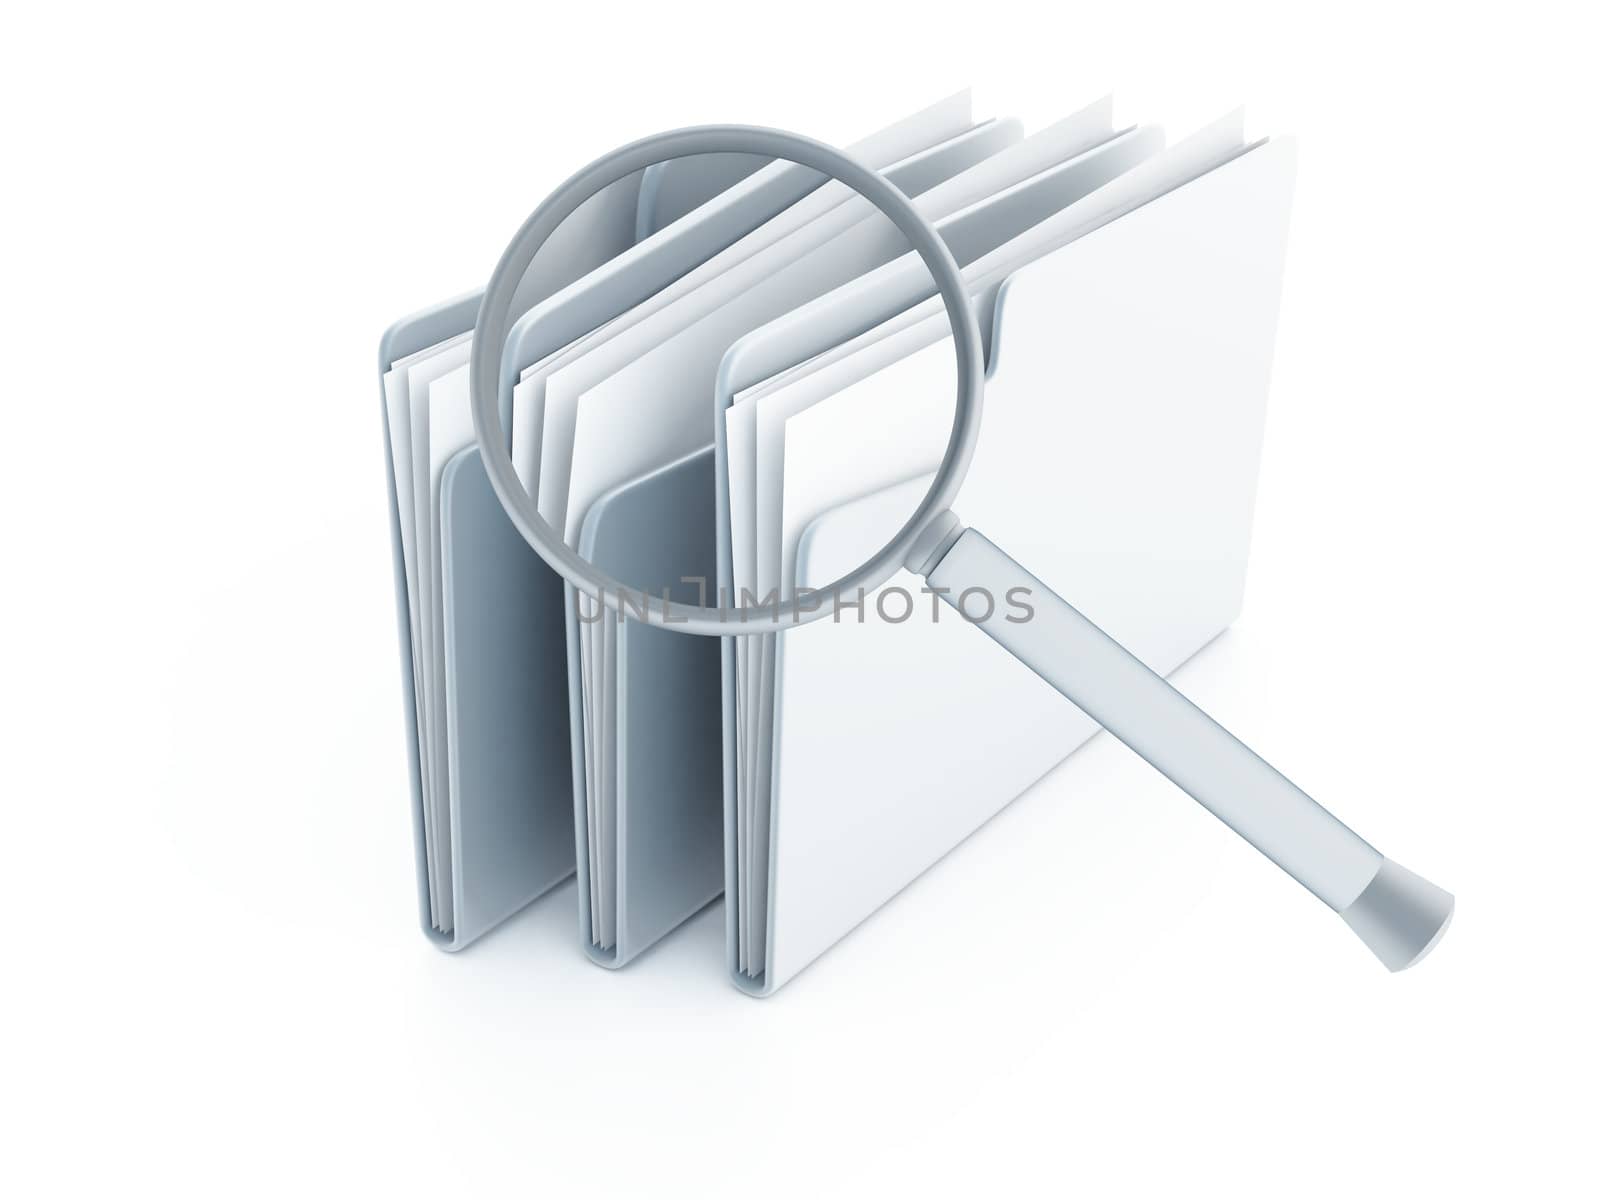 blue folders with papers under magnifier on a white background